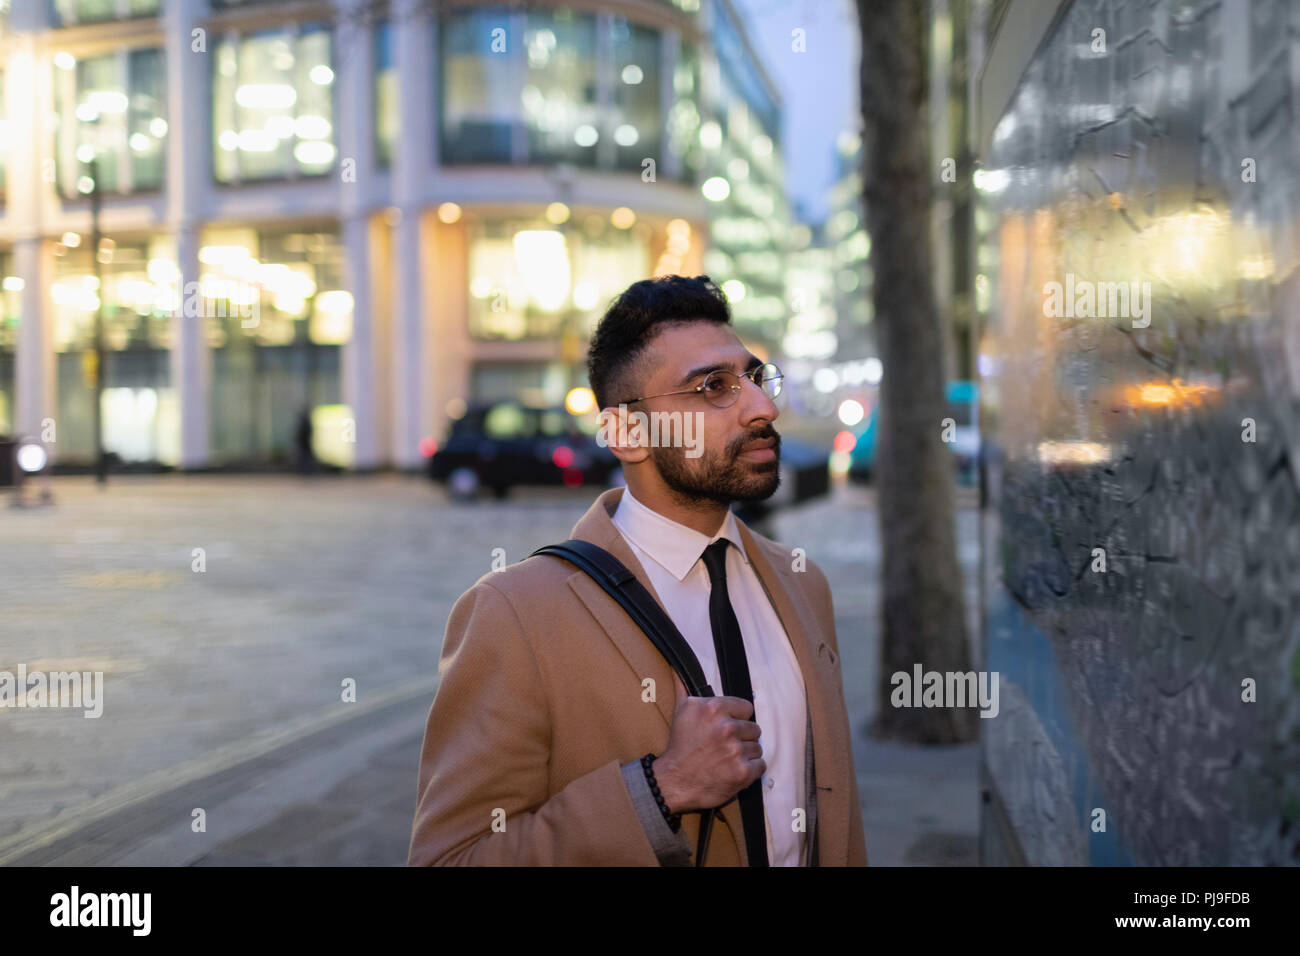 Businessman looking at city map on urban street at night Stock Photo